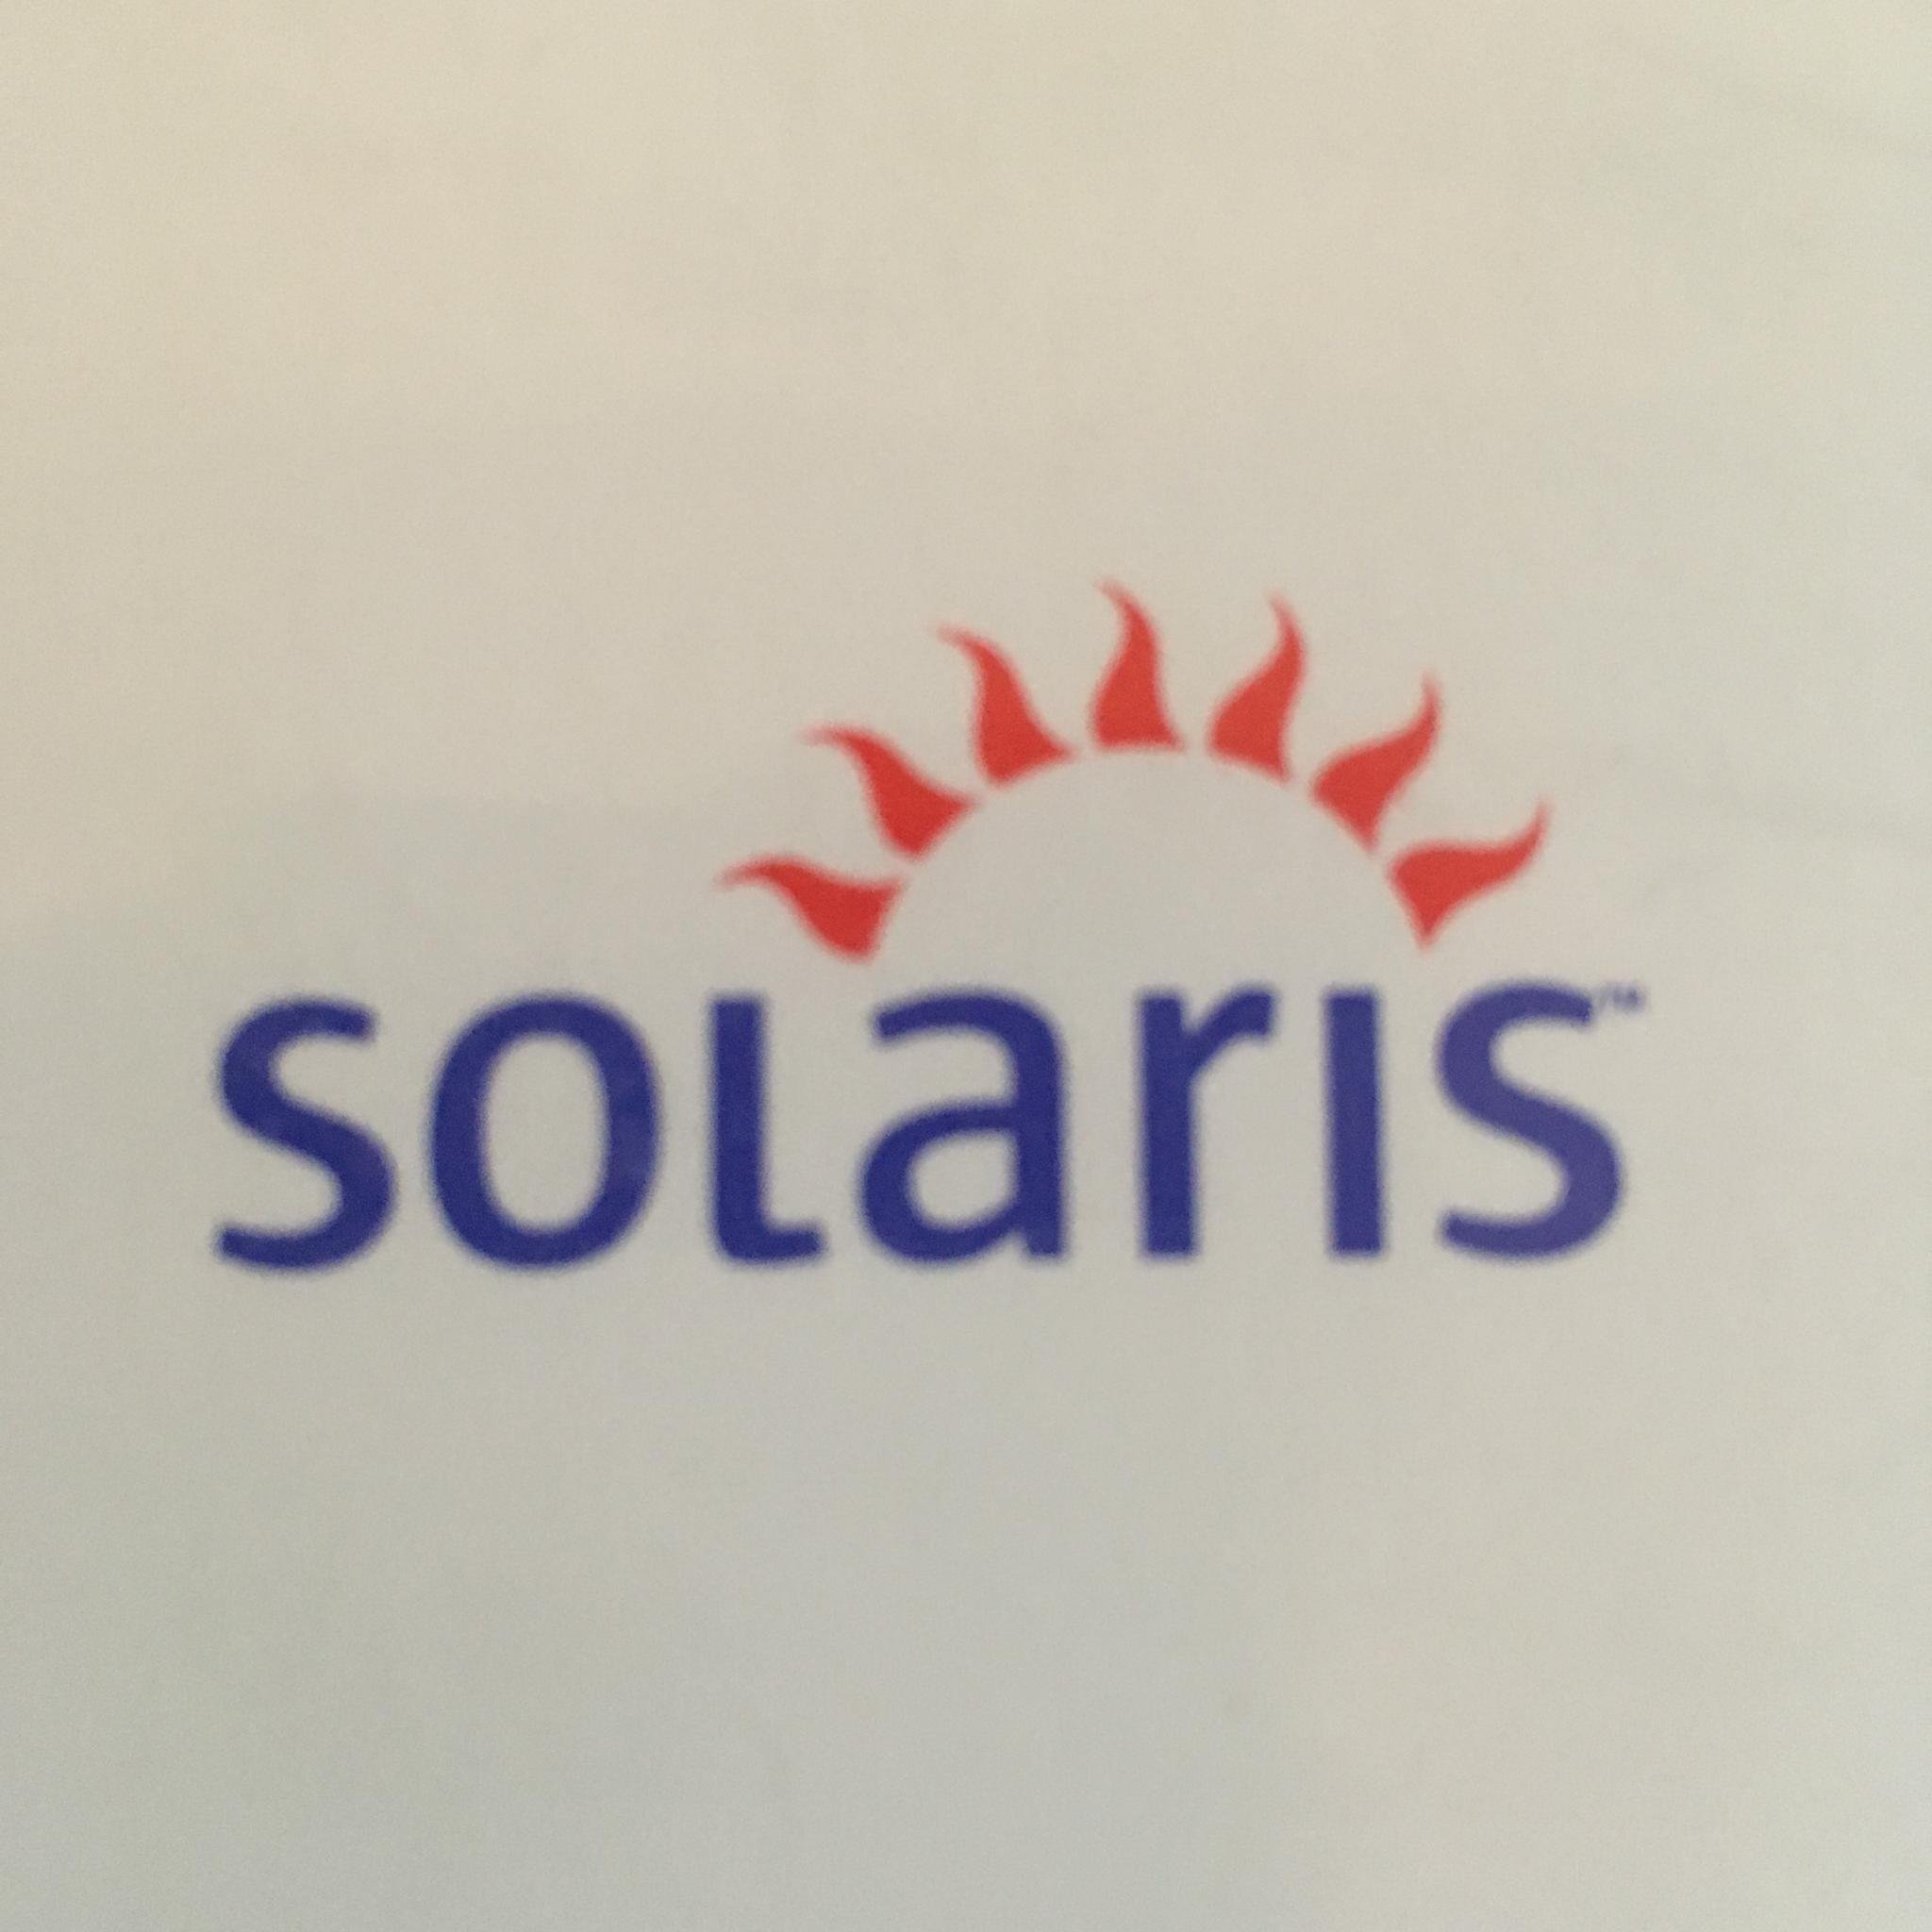 Solaris Updates and News
This account is not managed by Oracle